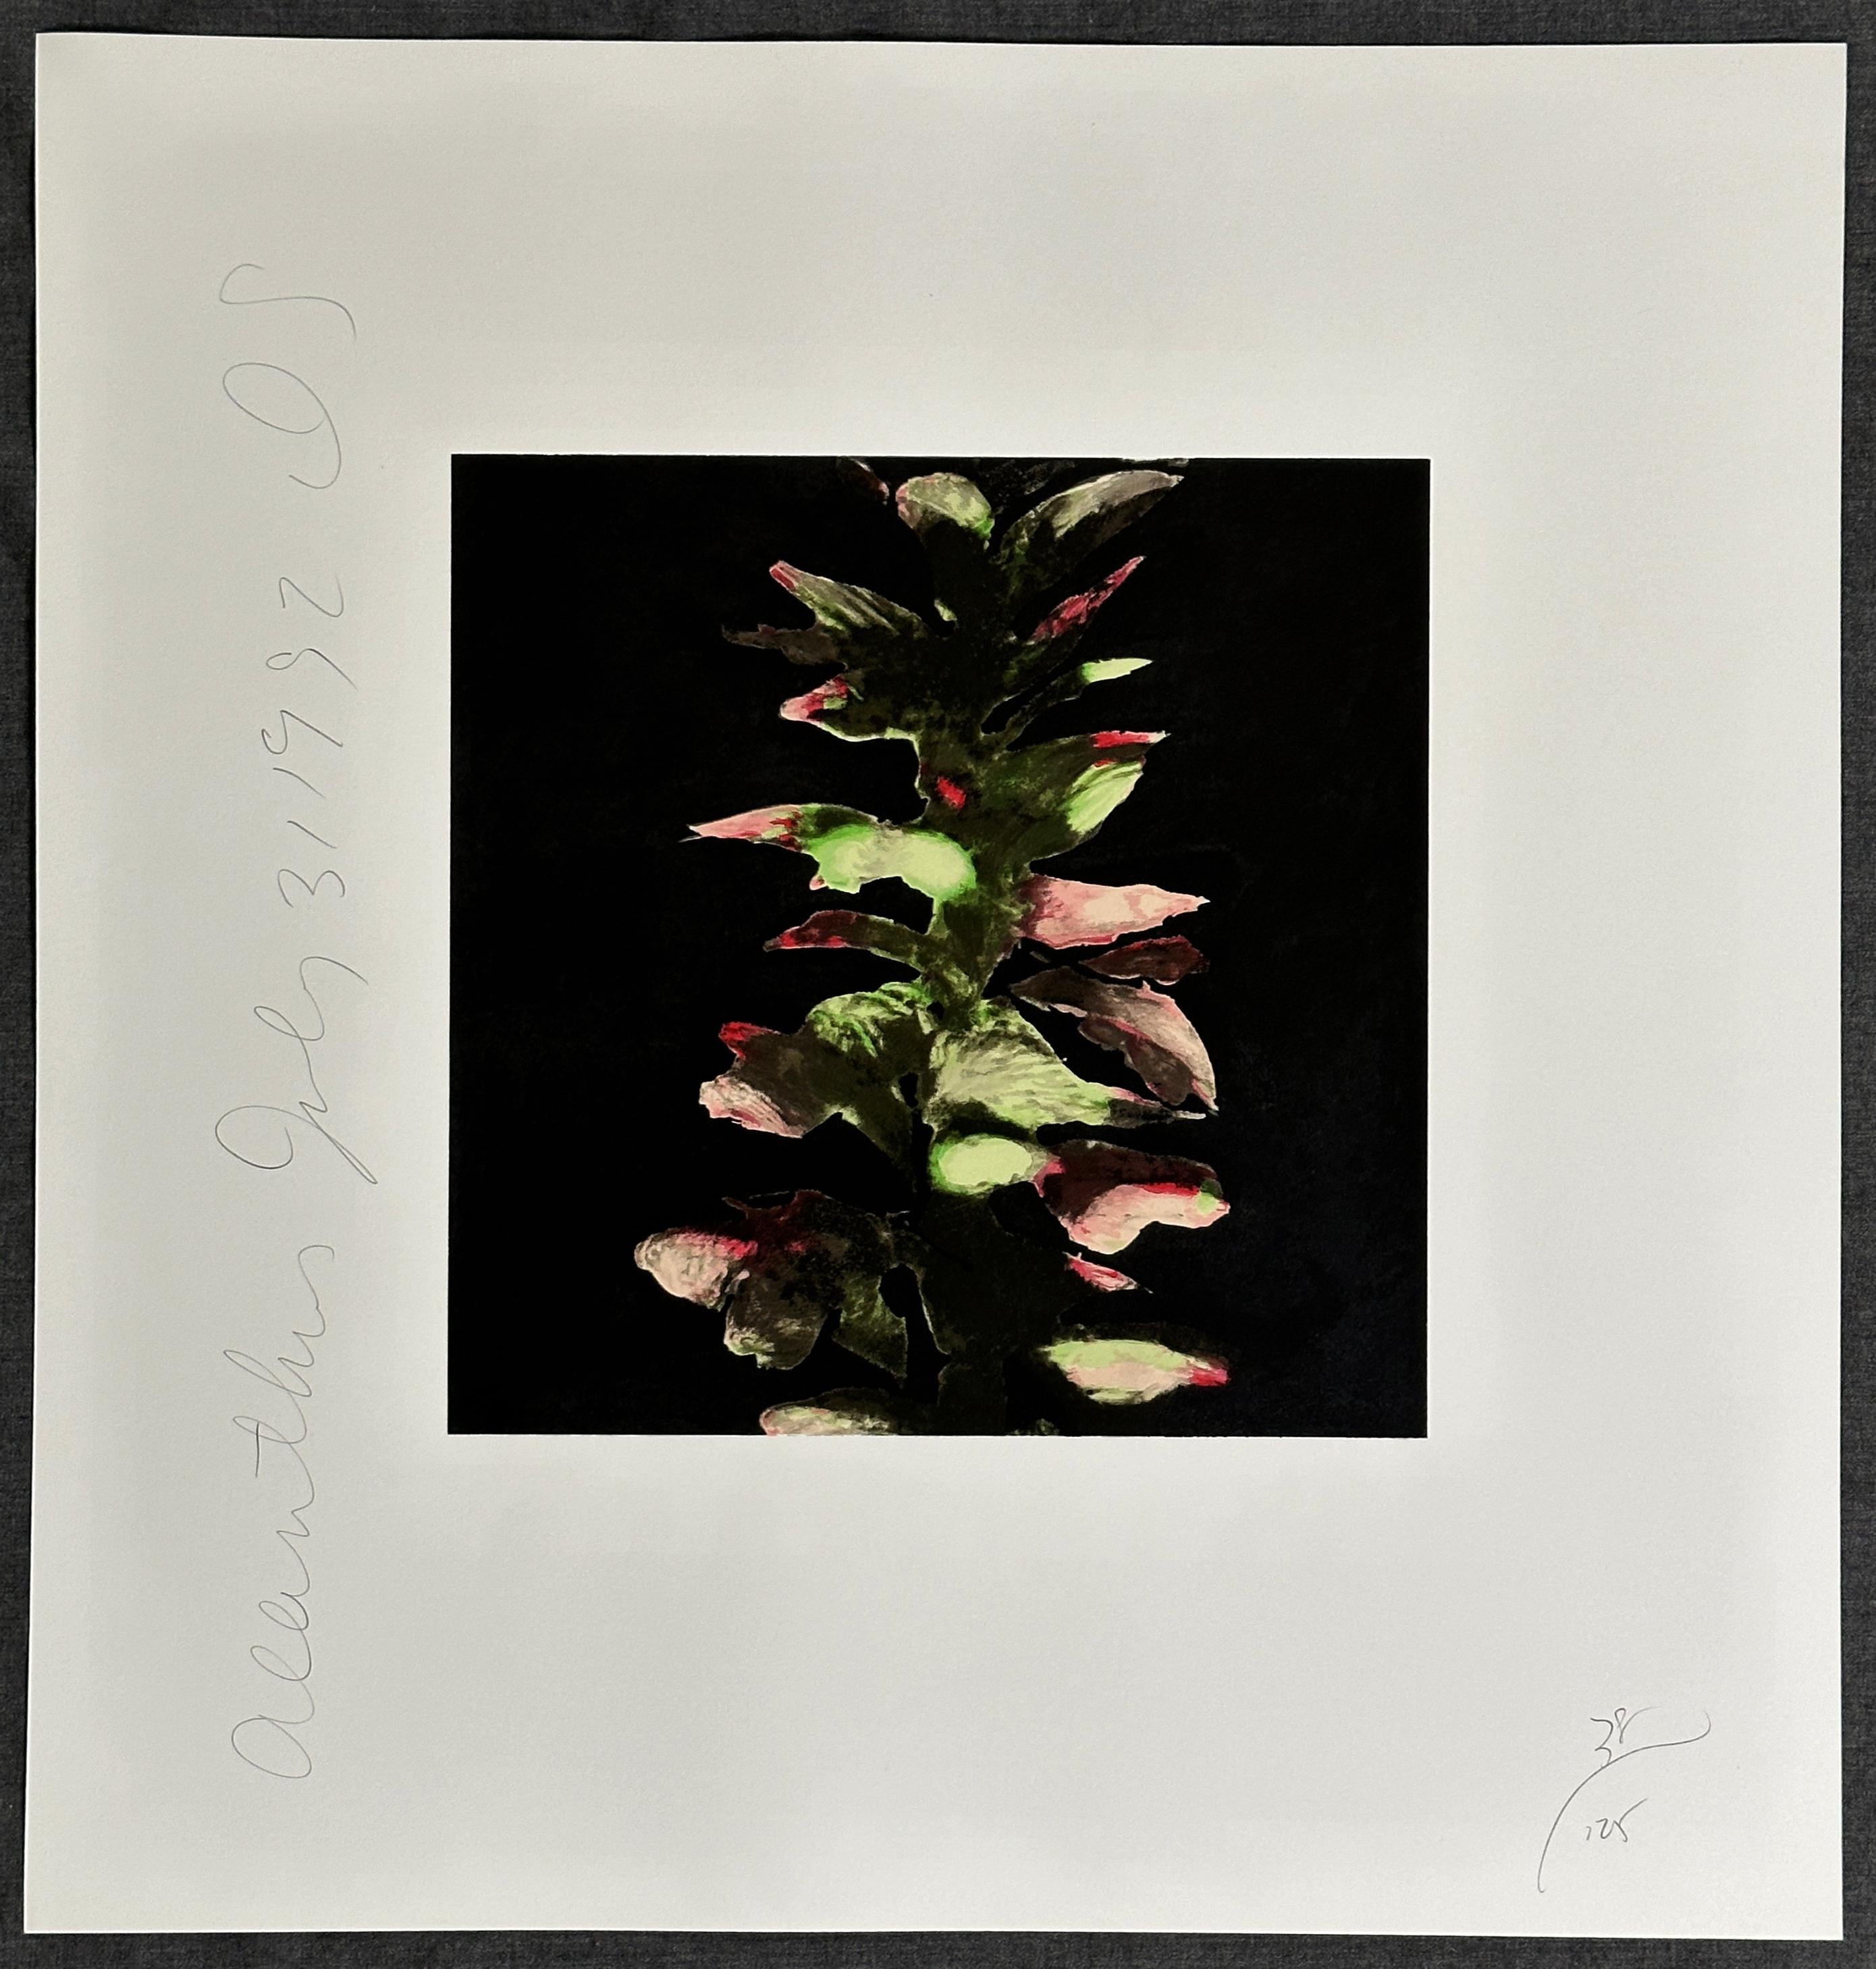 Acanthus
Print - Screen Print 
Paper size 22.75'' x 21.75'' inches
Image size 12